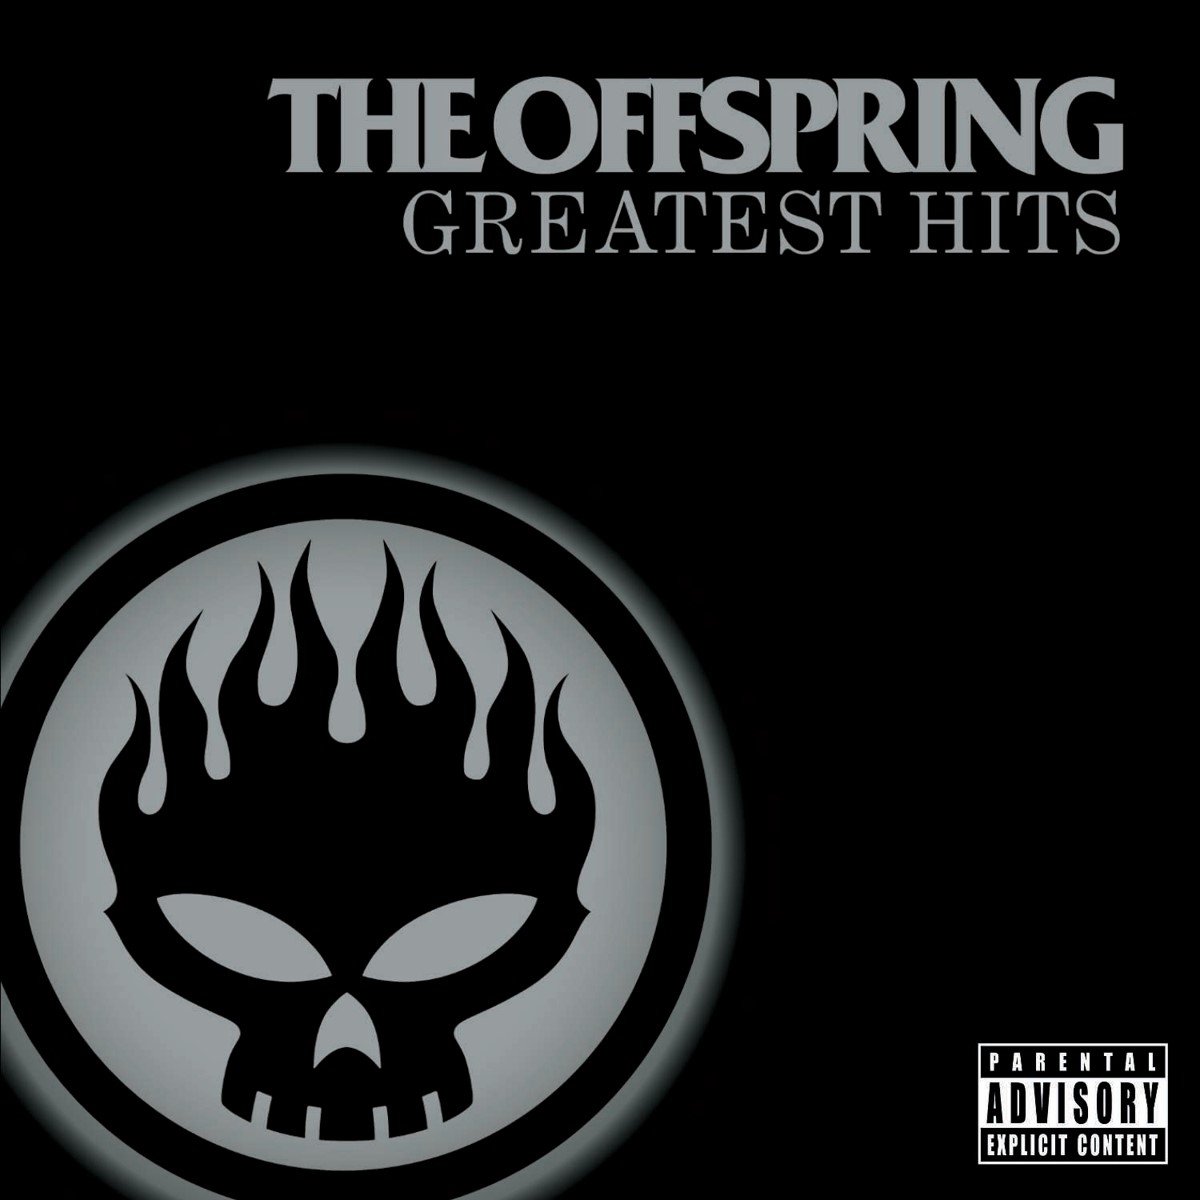 The Offspring - Greatest Hits (CD) - The Offspring